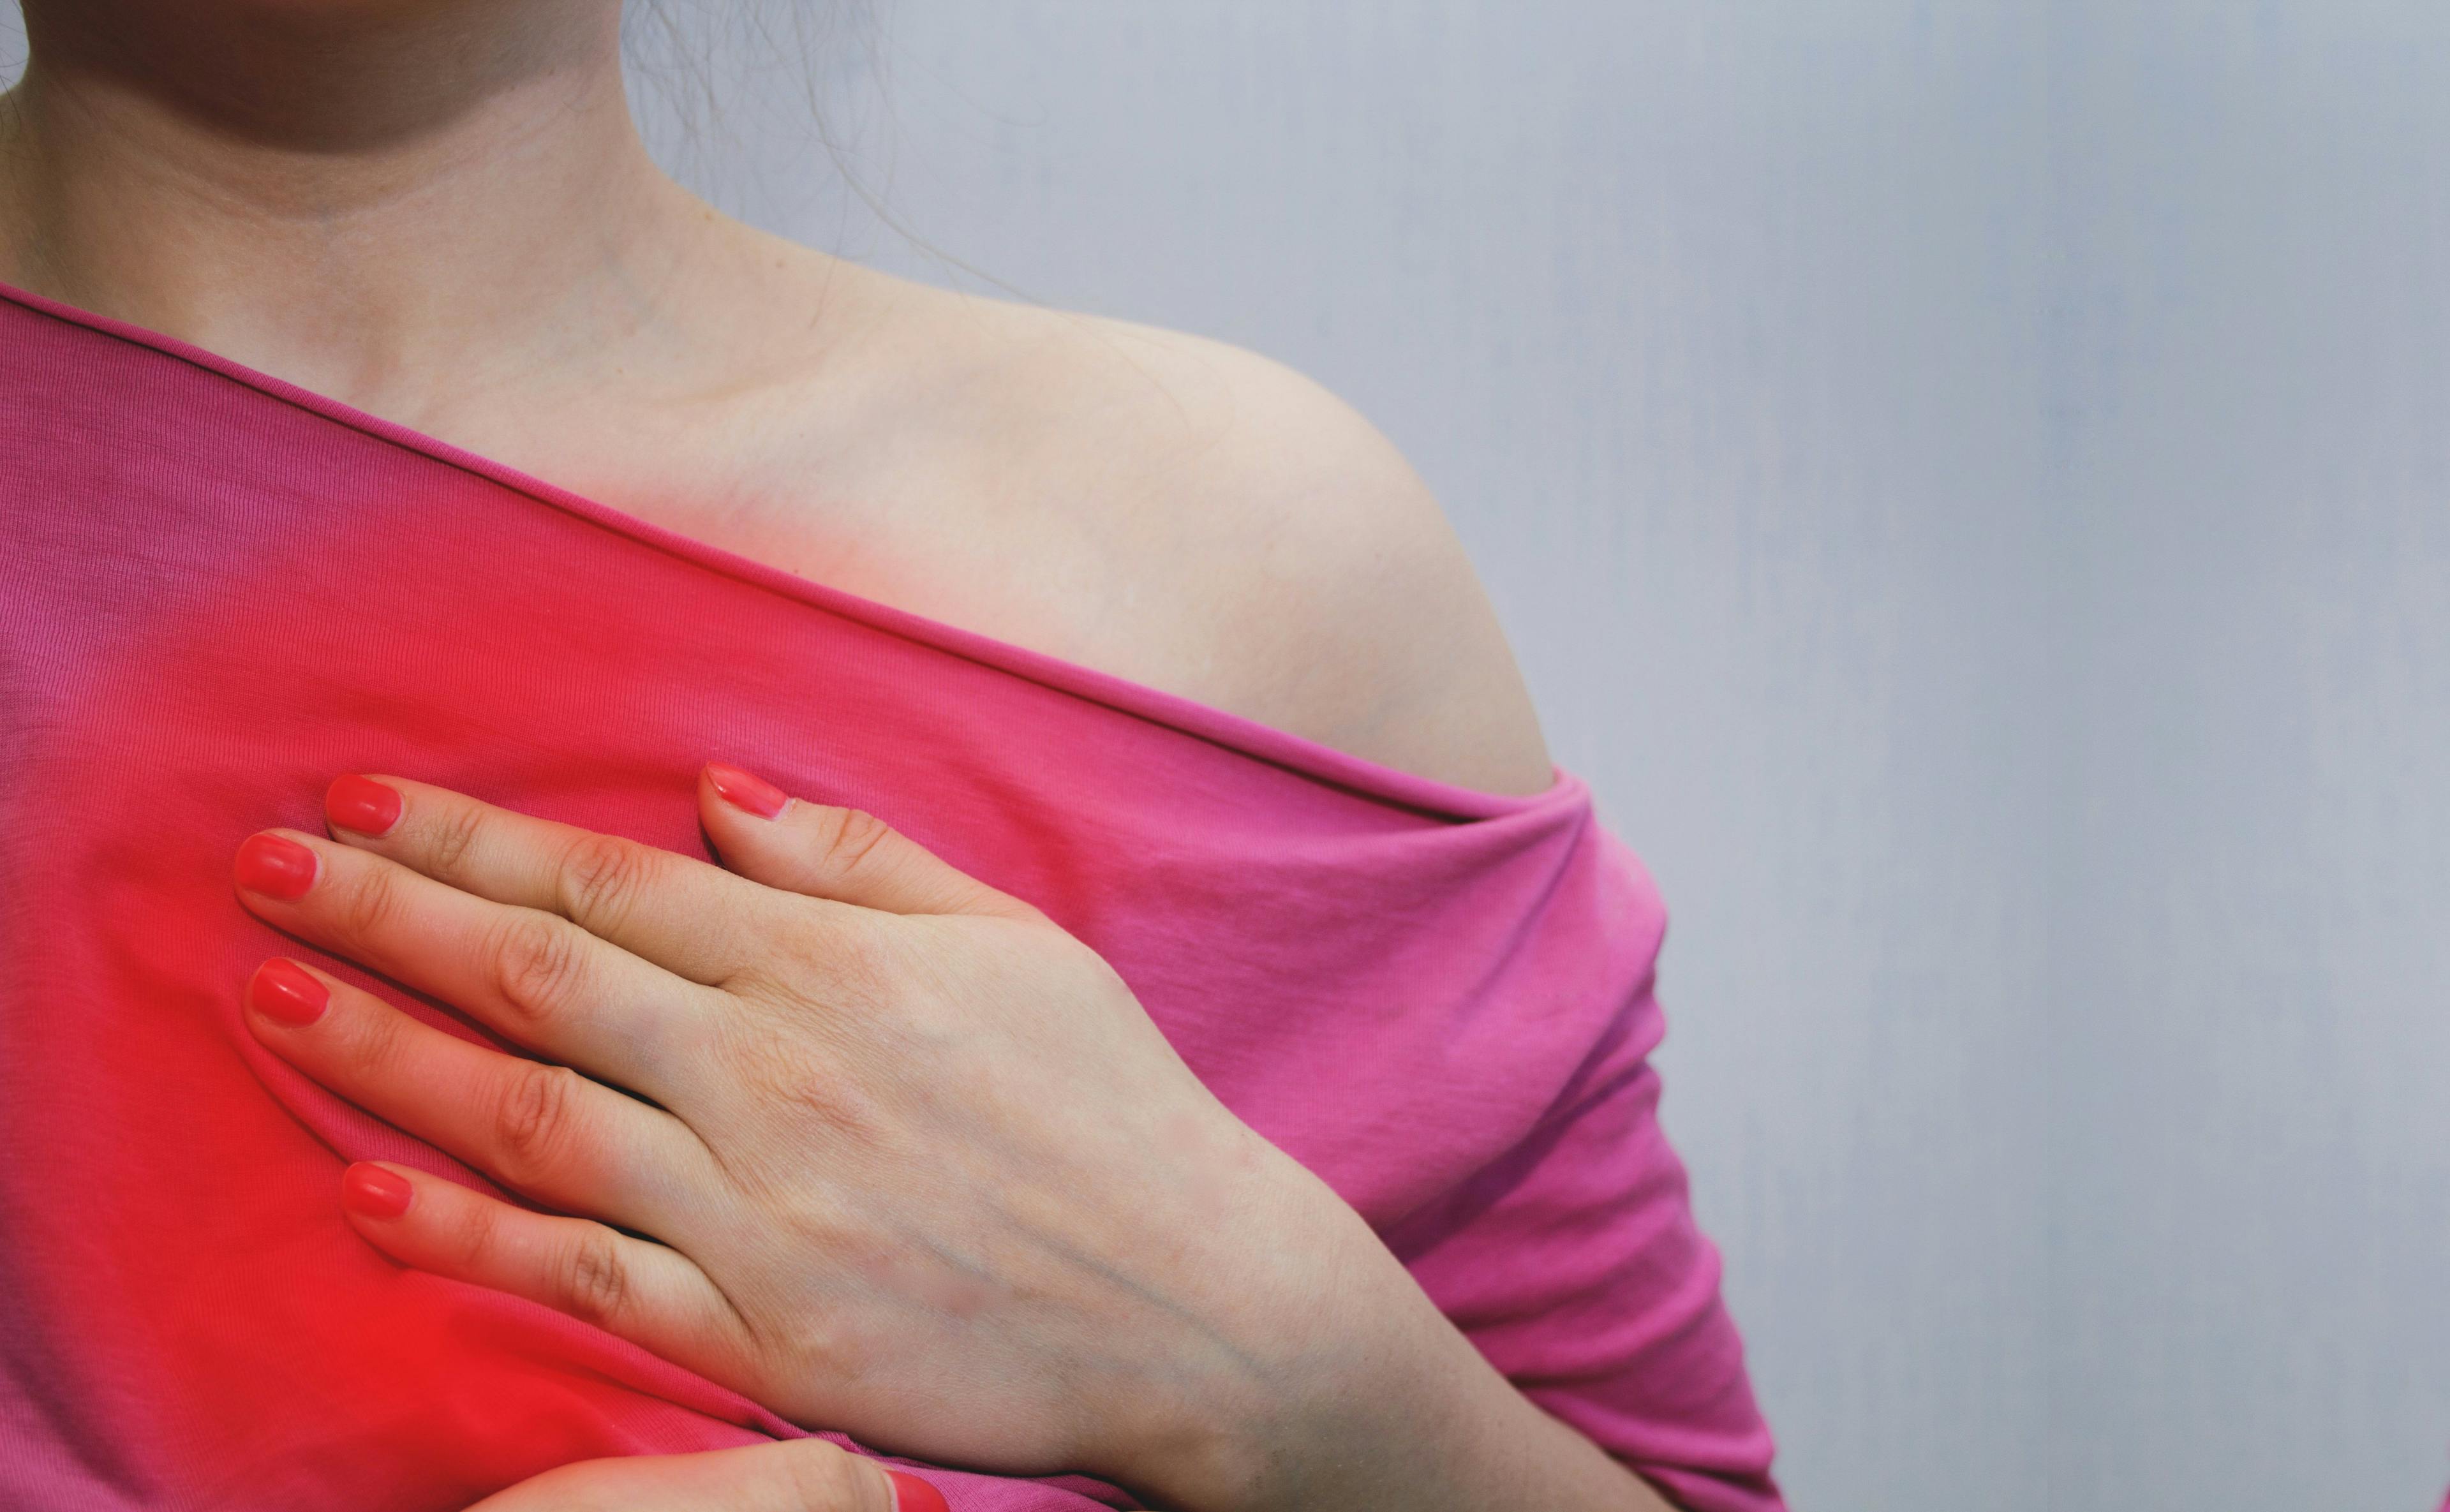 Woman with cardiovascular disease experiencing chest pain. | Credit: Adobe Stock